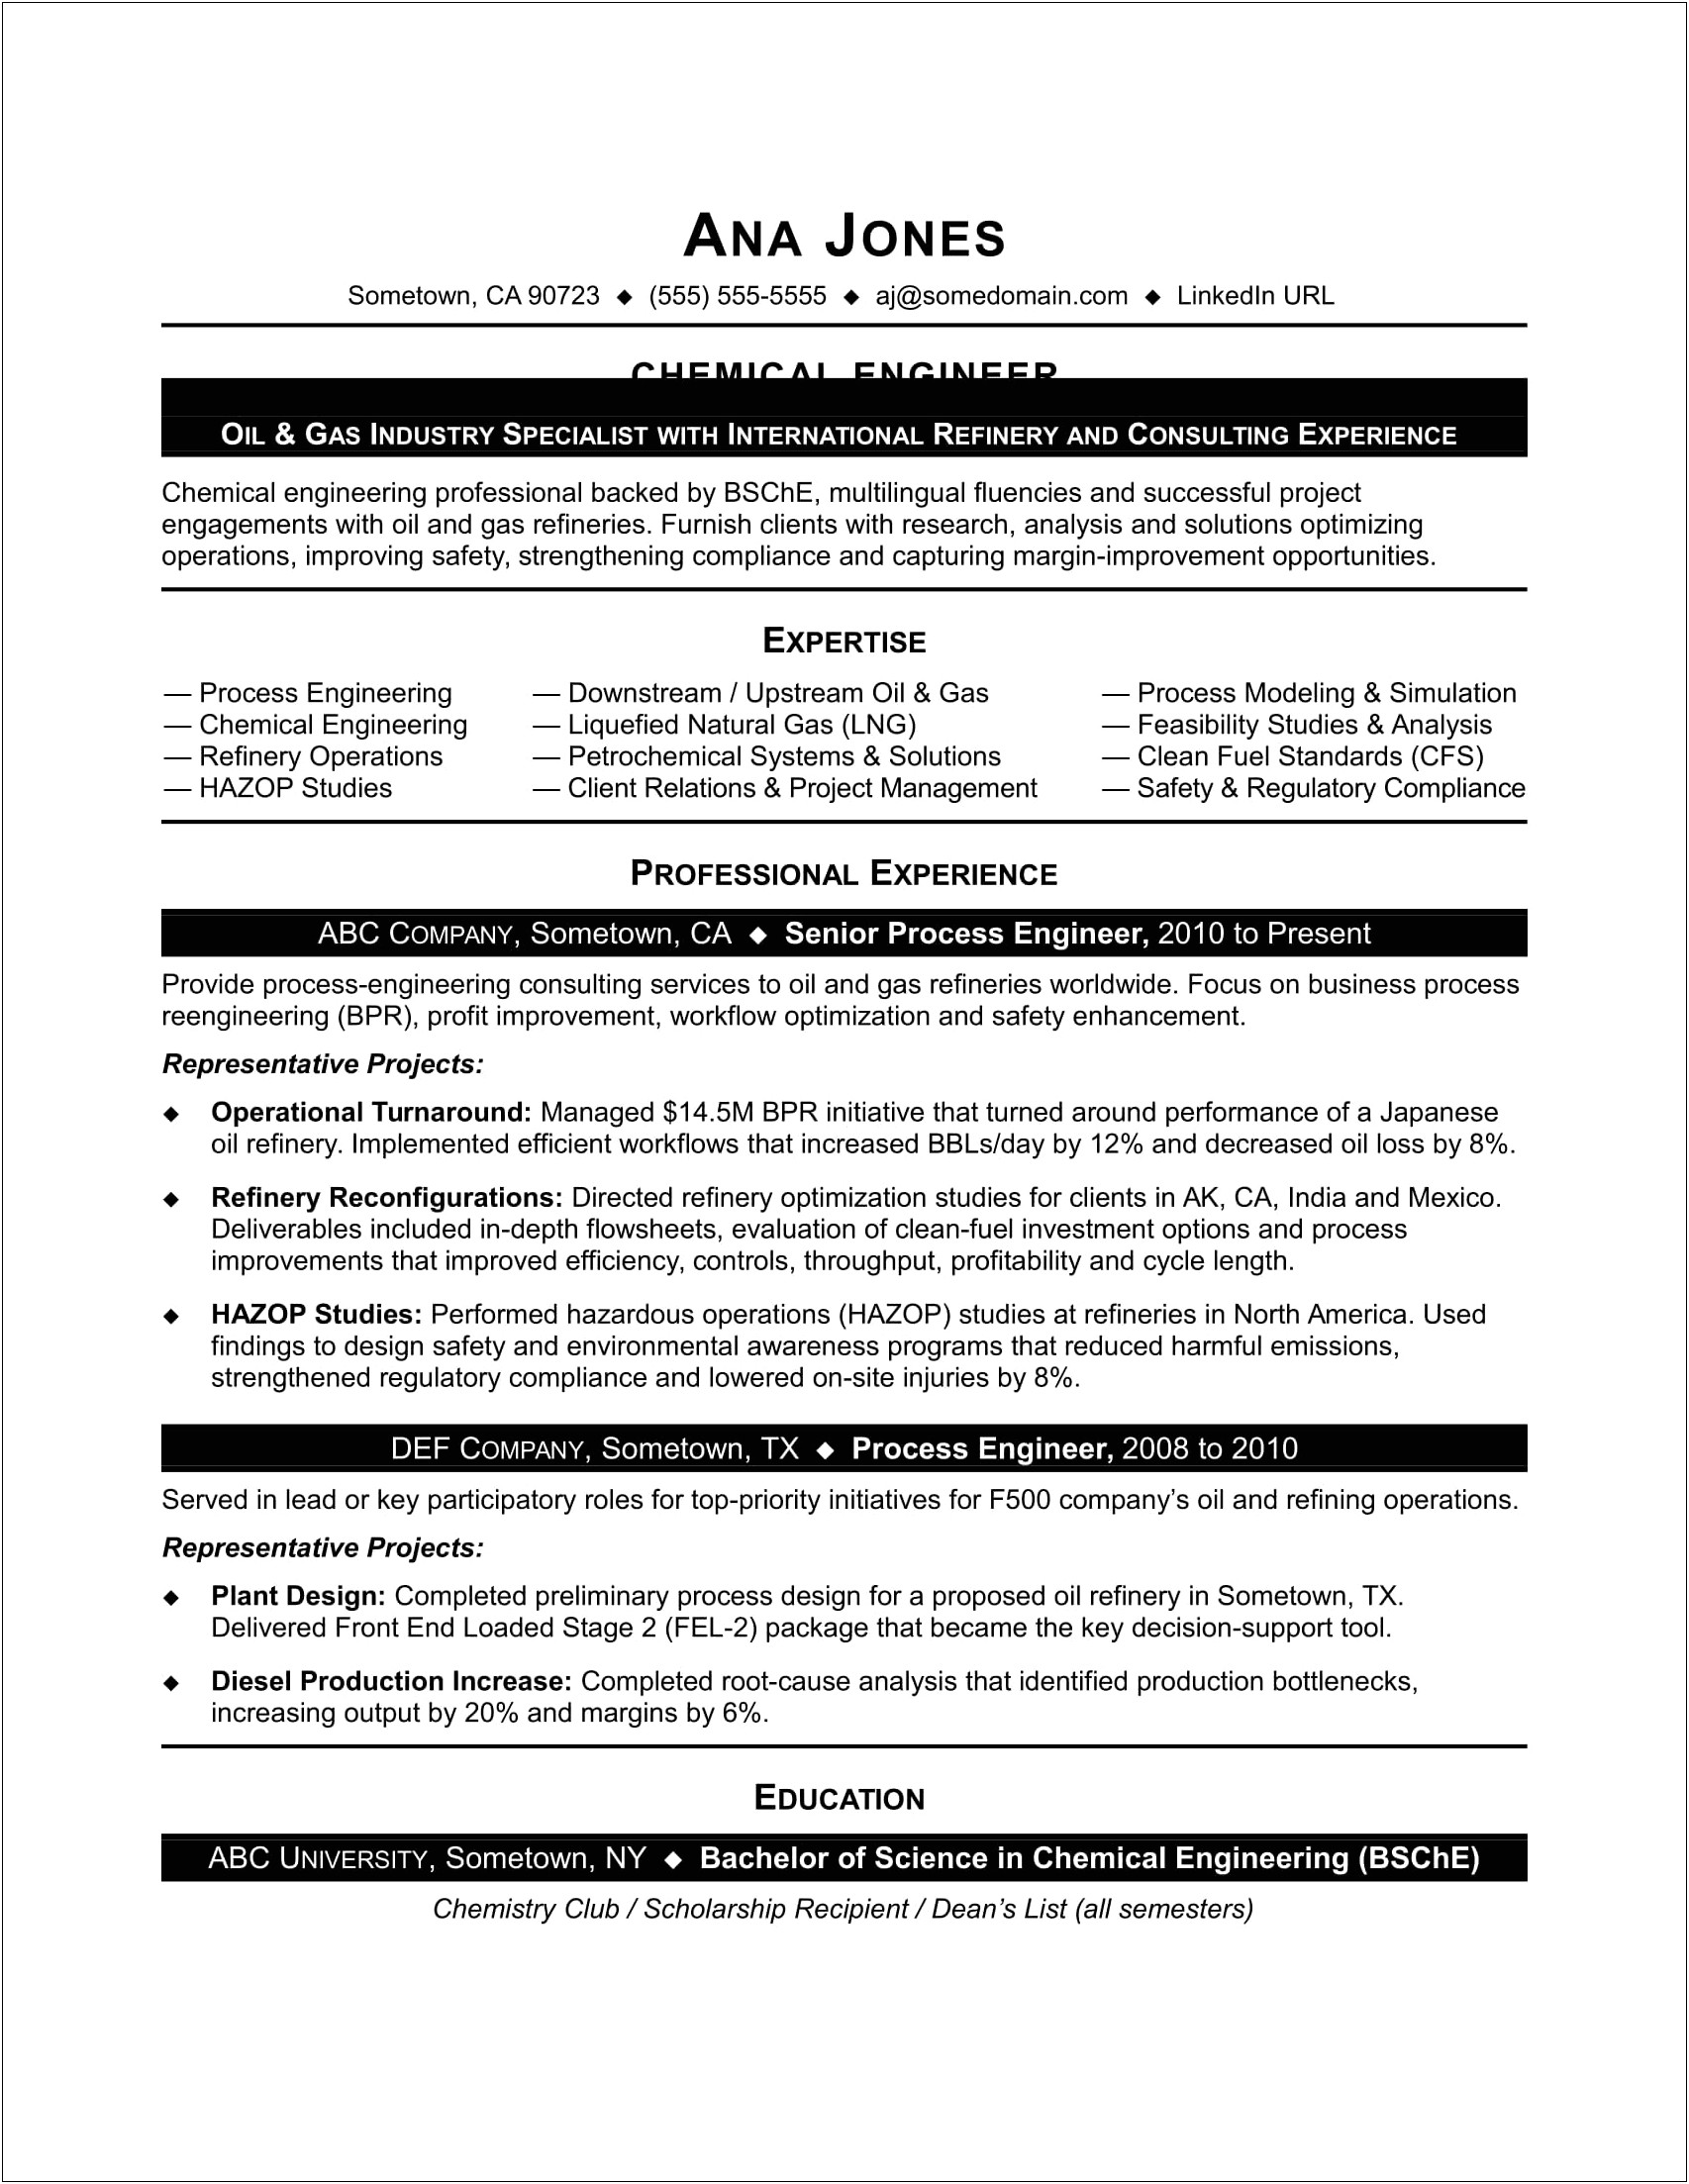 Best Engineer Resume With No Experience